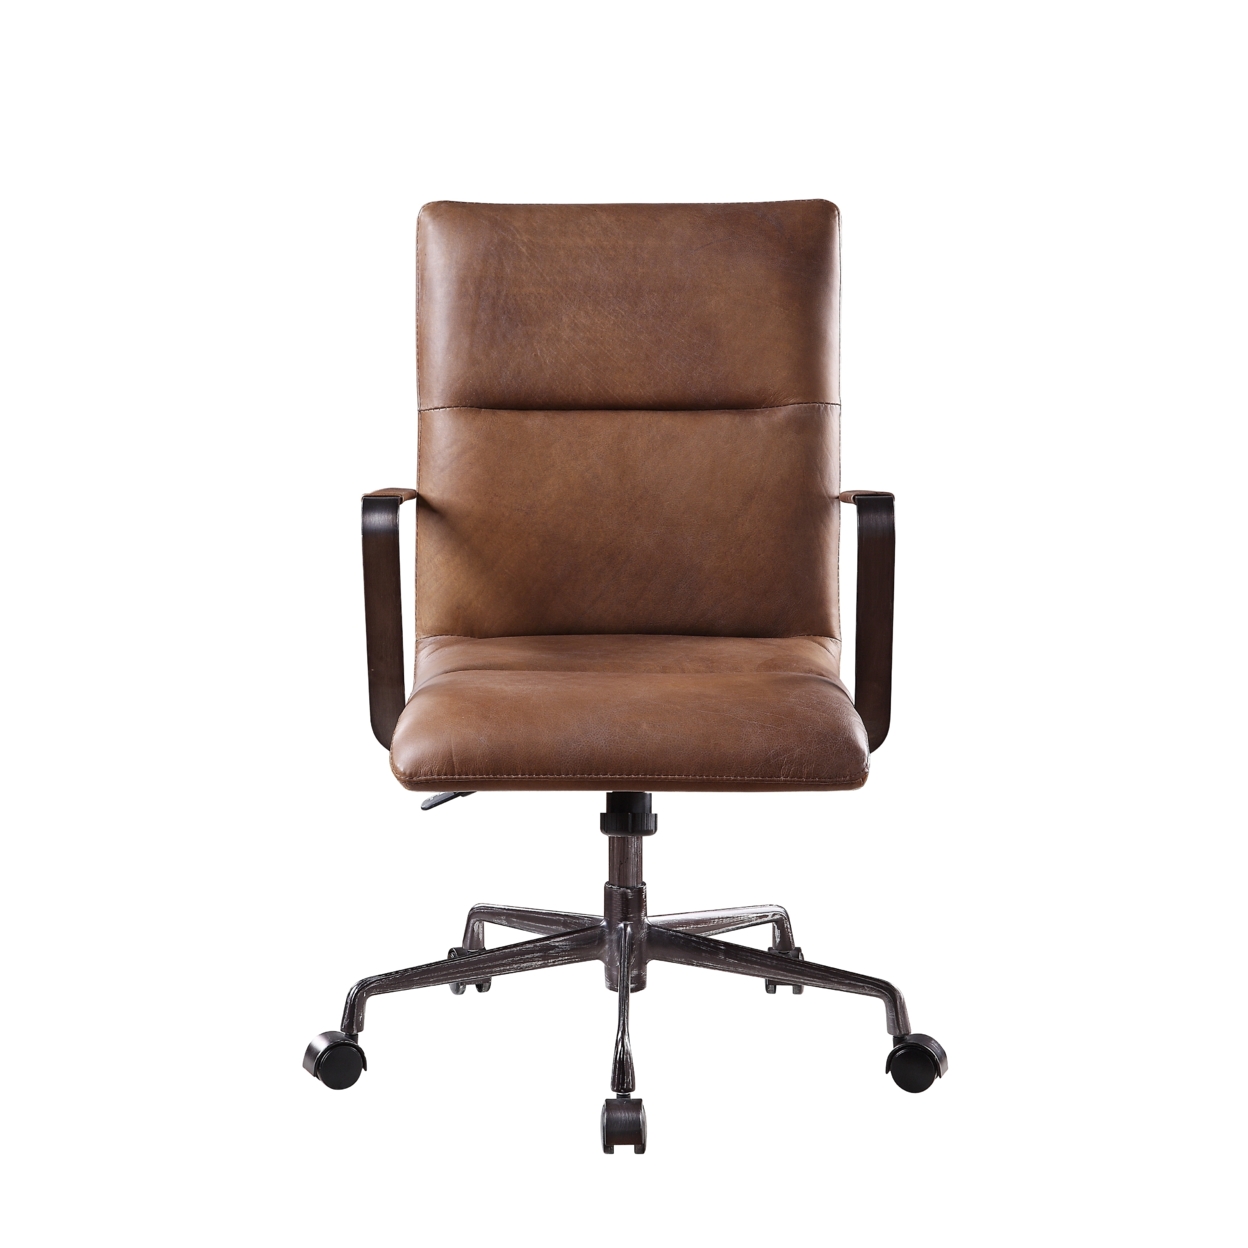 5 Star Base Faux Leather Upholstered Wooden Office Chair , Brown- Saltoro Sherpi